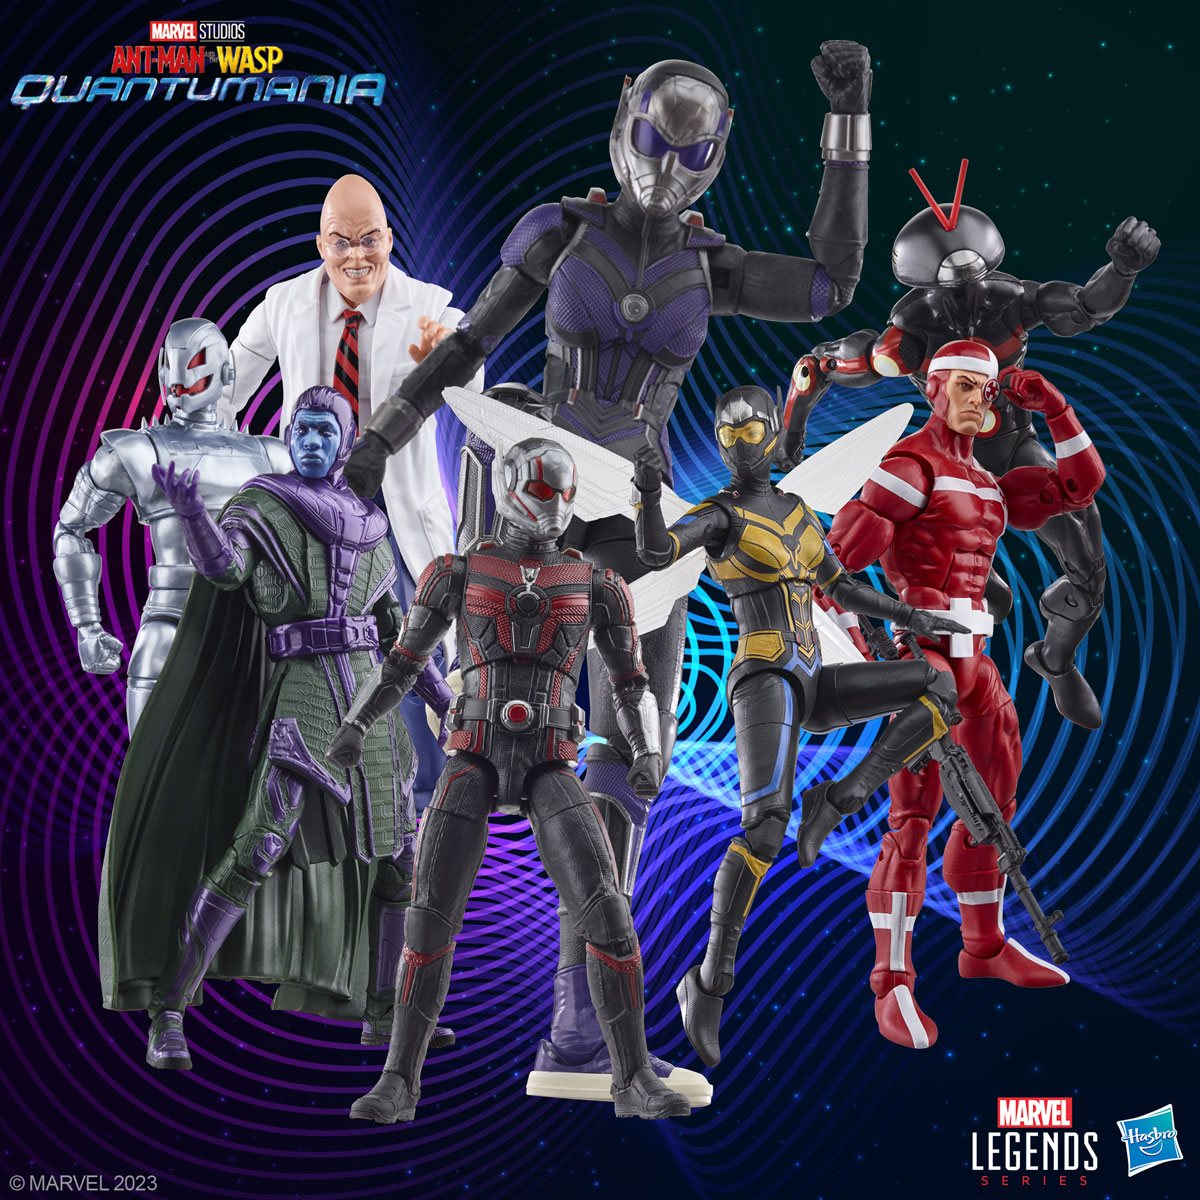  Marvel Legends Series Ant-Man,Ant-Man & The Wasp: Quantumania  Collectible 6-Inch Action Figures, Ages 4 and Up : Toys & Games